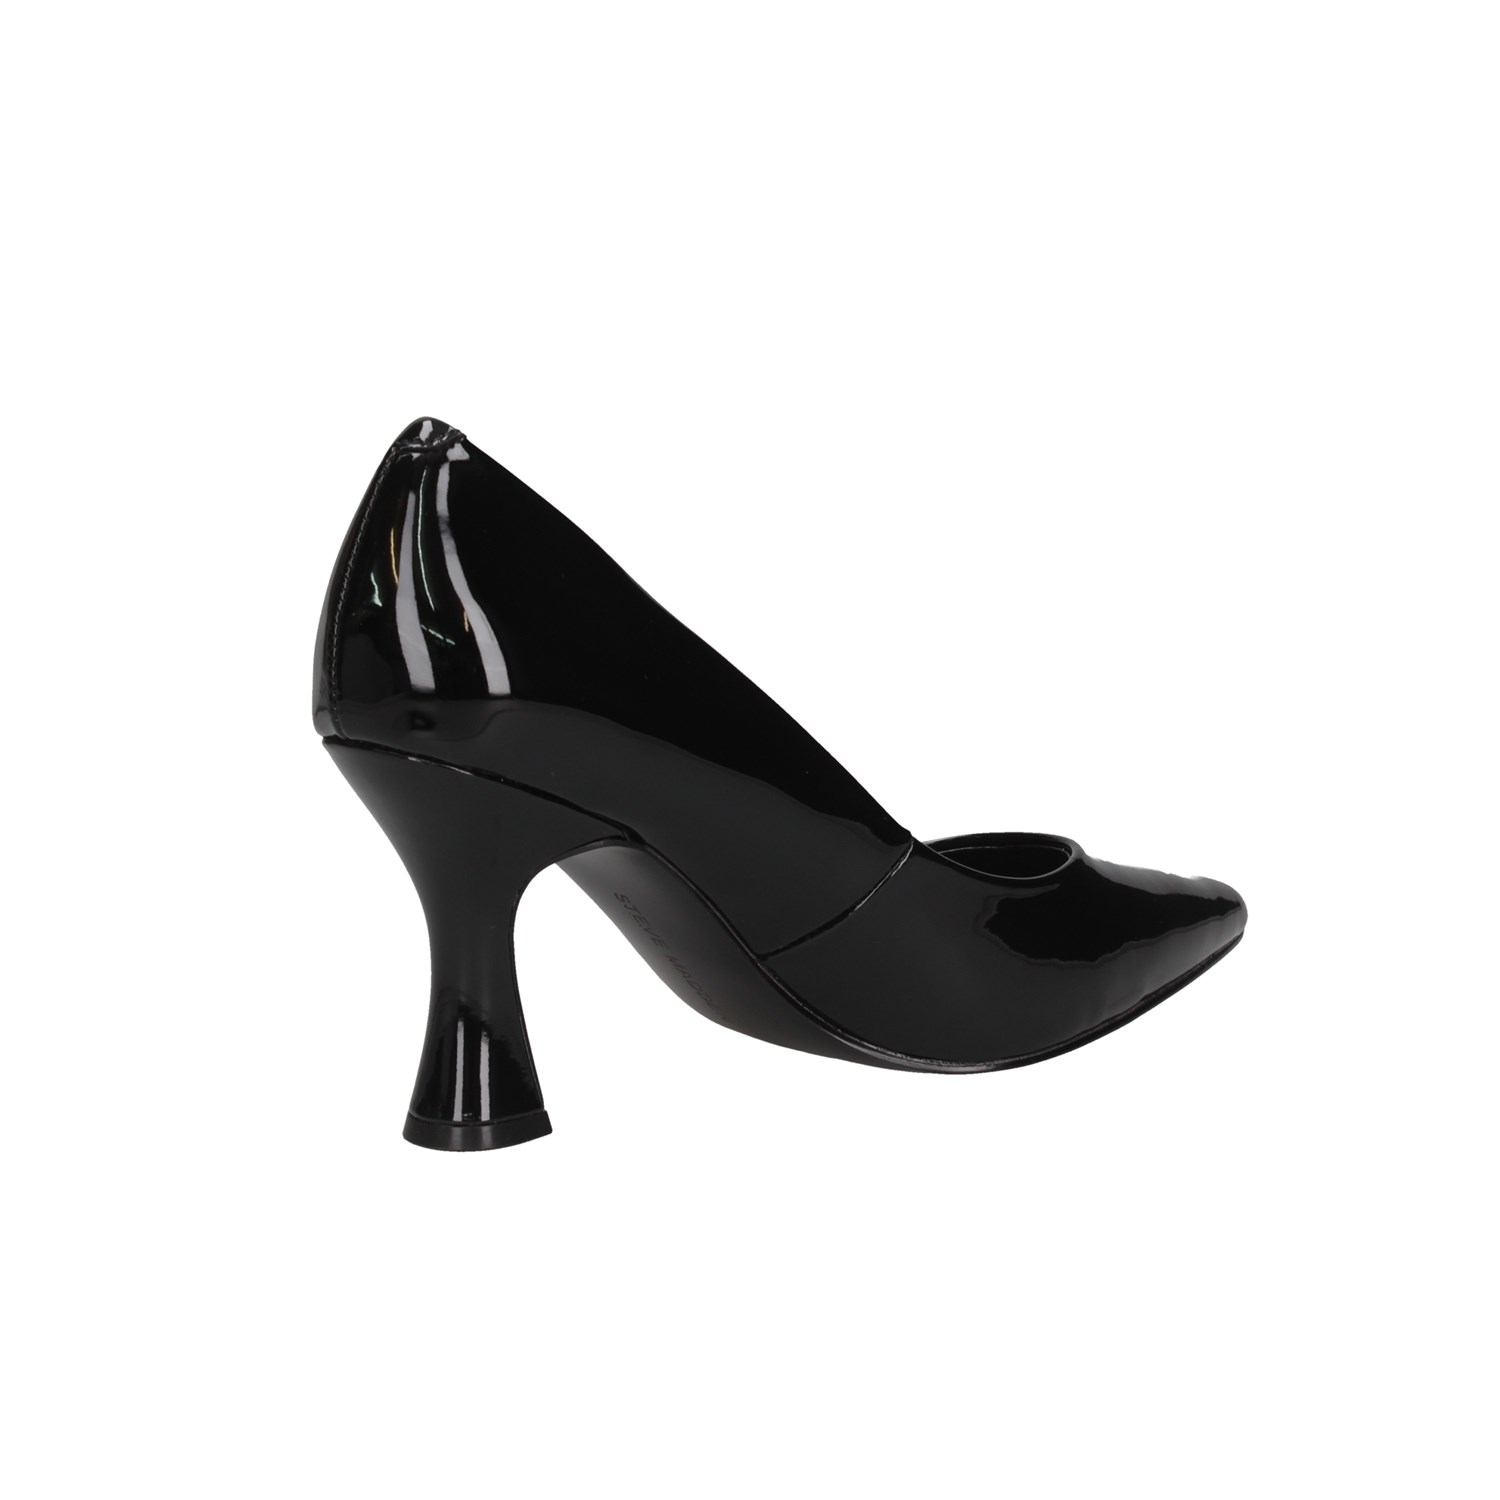 Steve Madden NOTARY Black Shoes Woman 